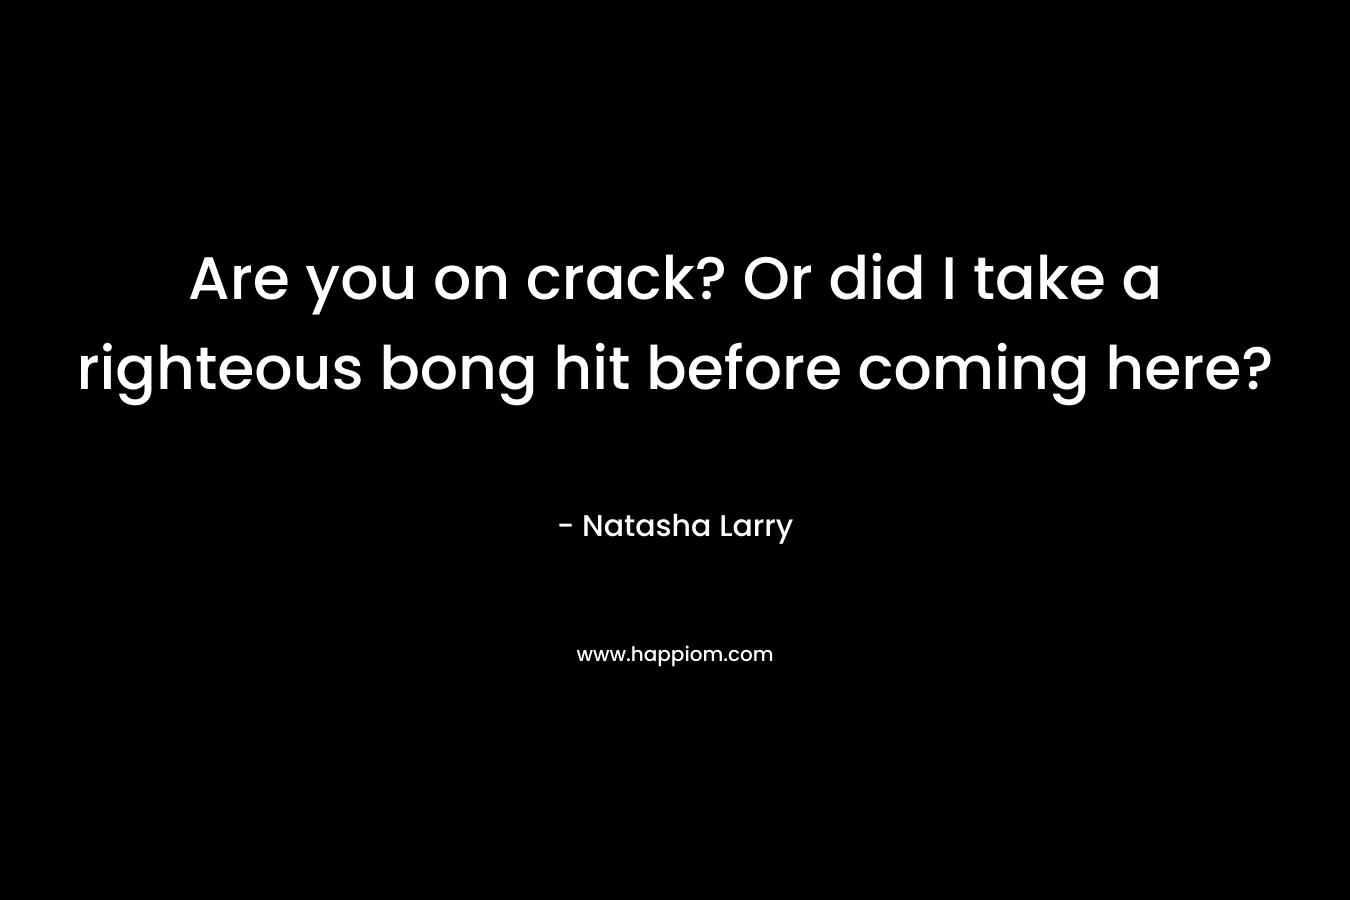 Are you on crack? Or did I take a righteous bong hit before coming here? – Natasha Larry